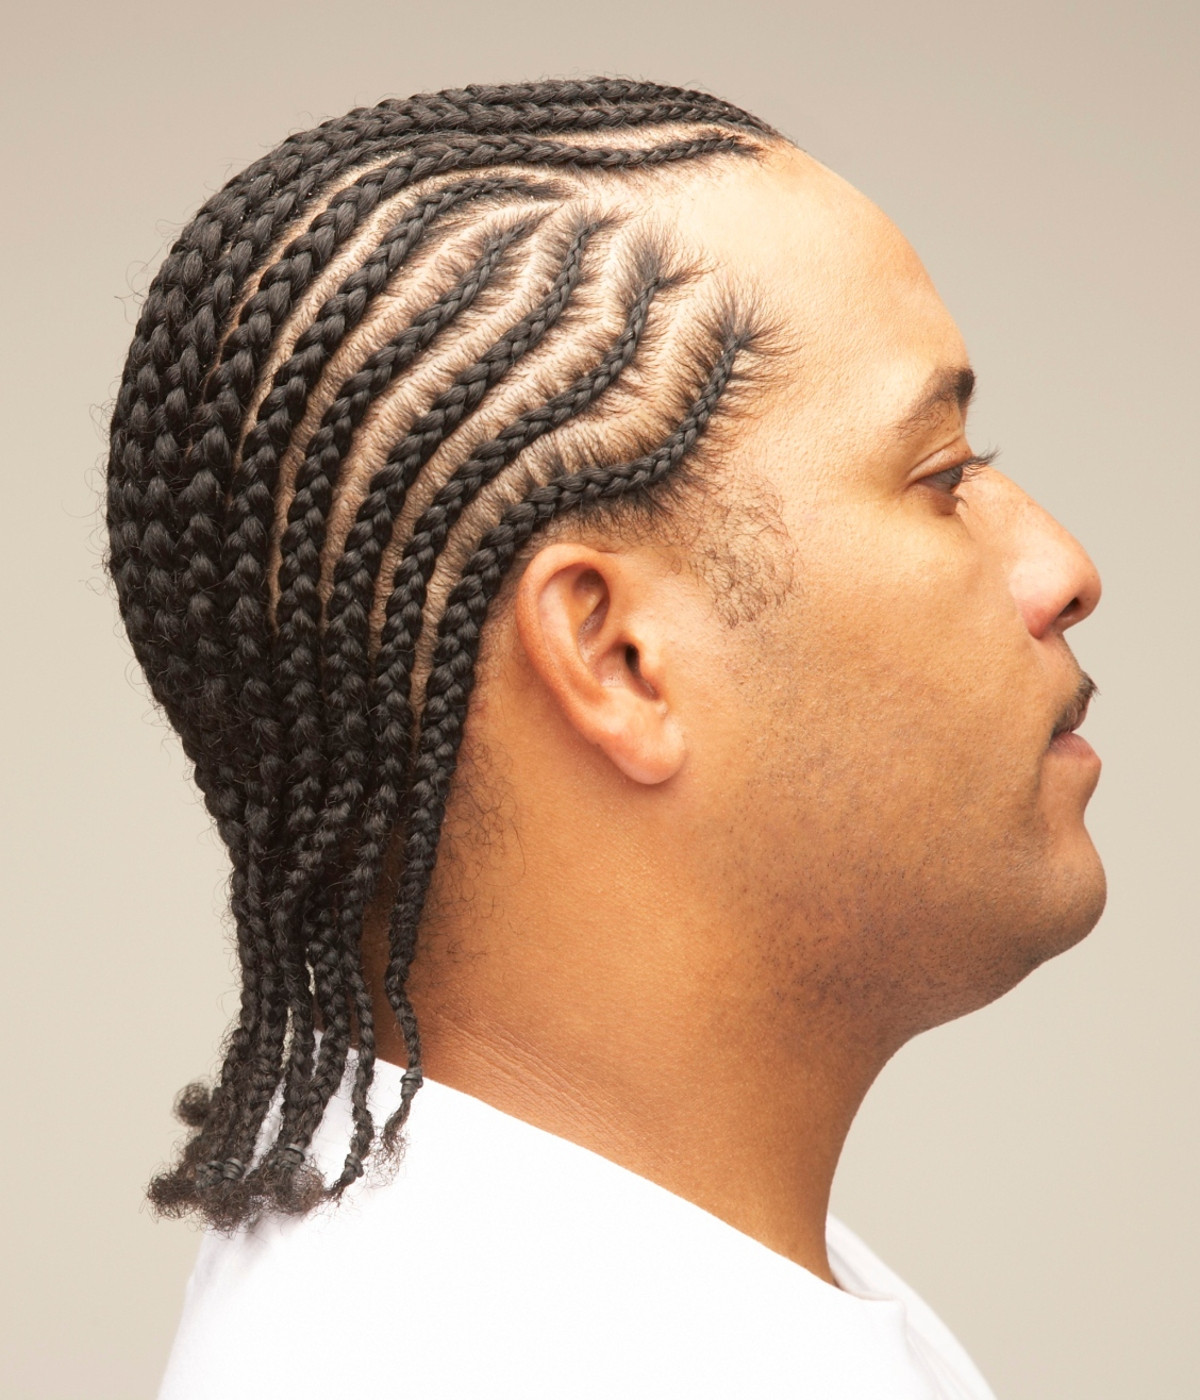 Man Braid Hairstyle
 Braided Hairstyles for Men That Will Catch Everyone s Eye